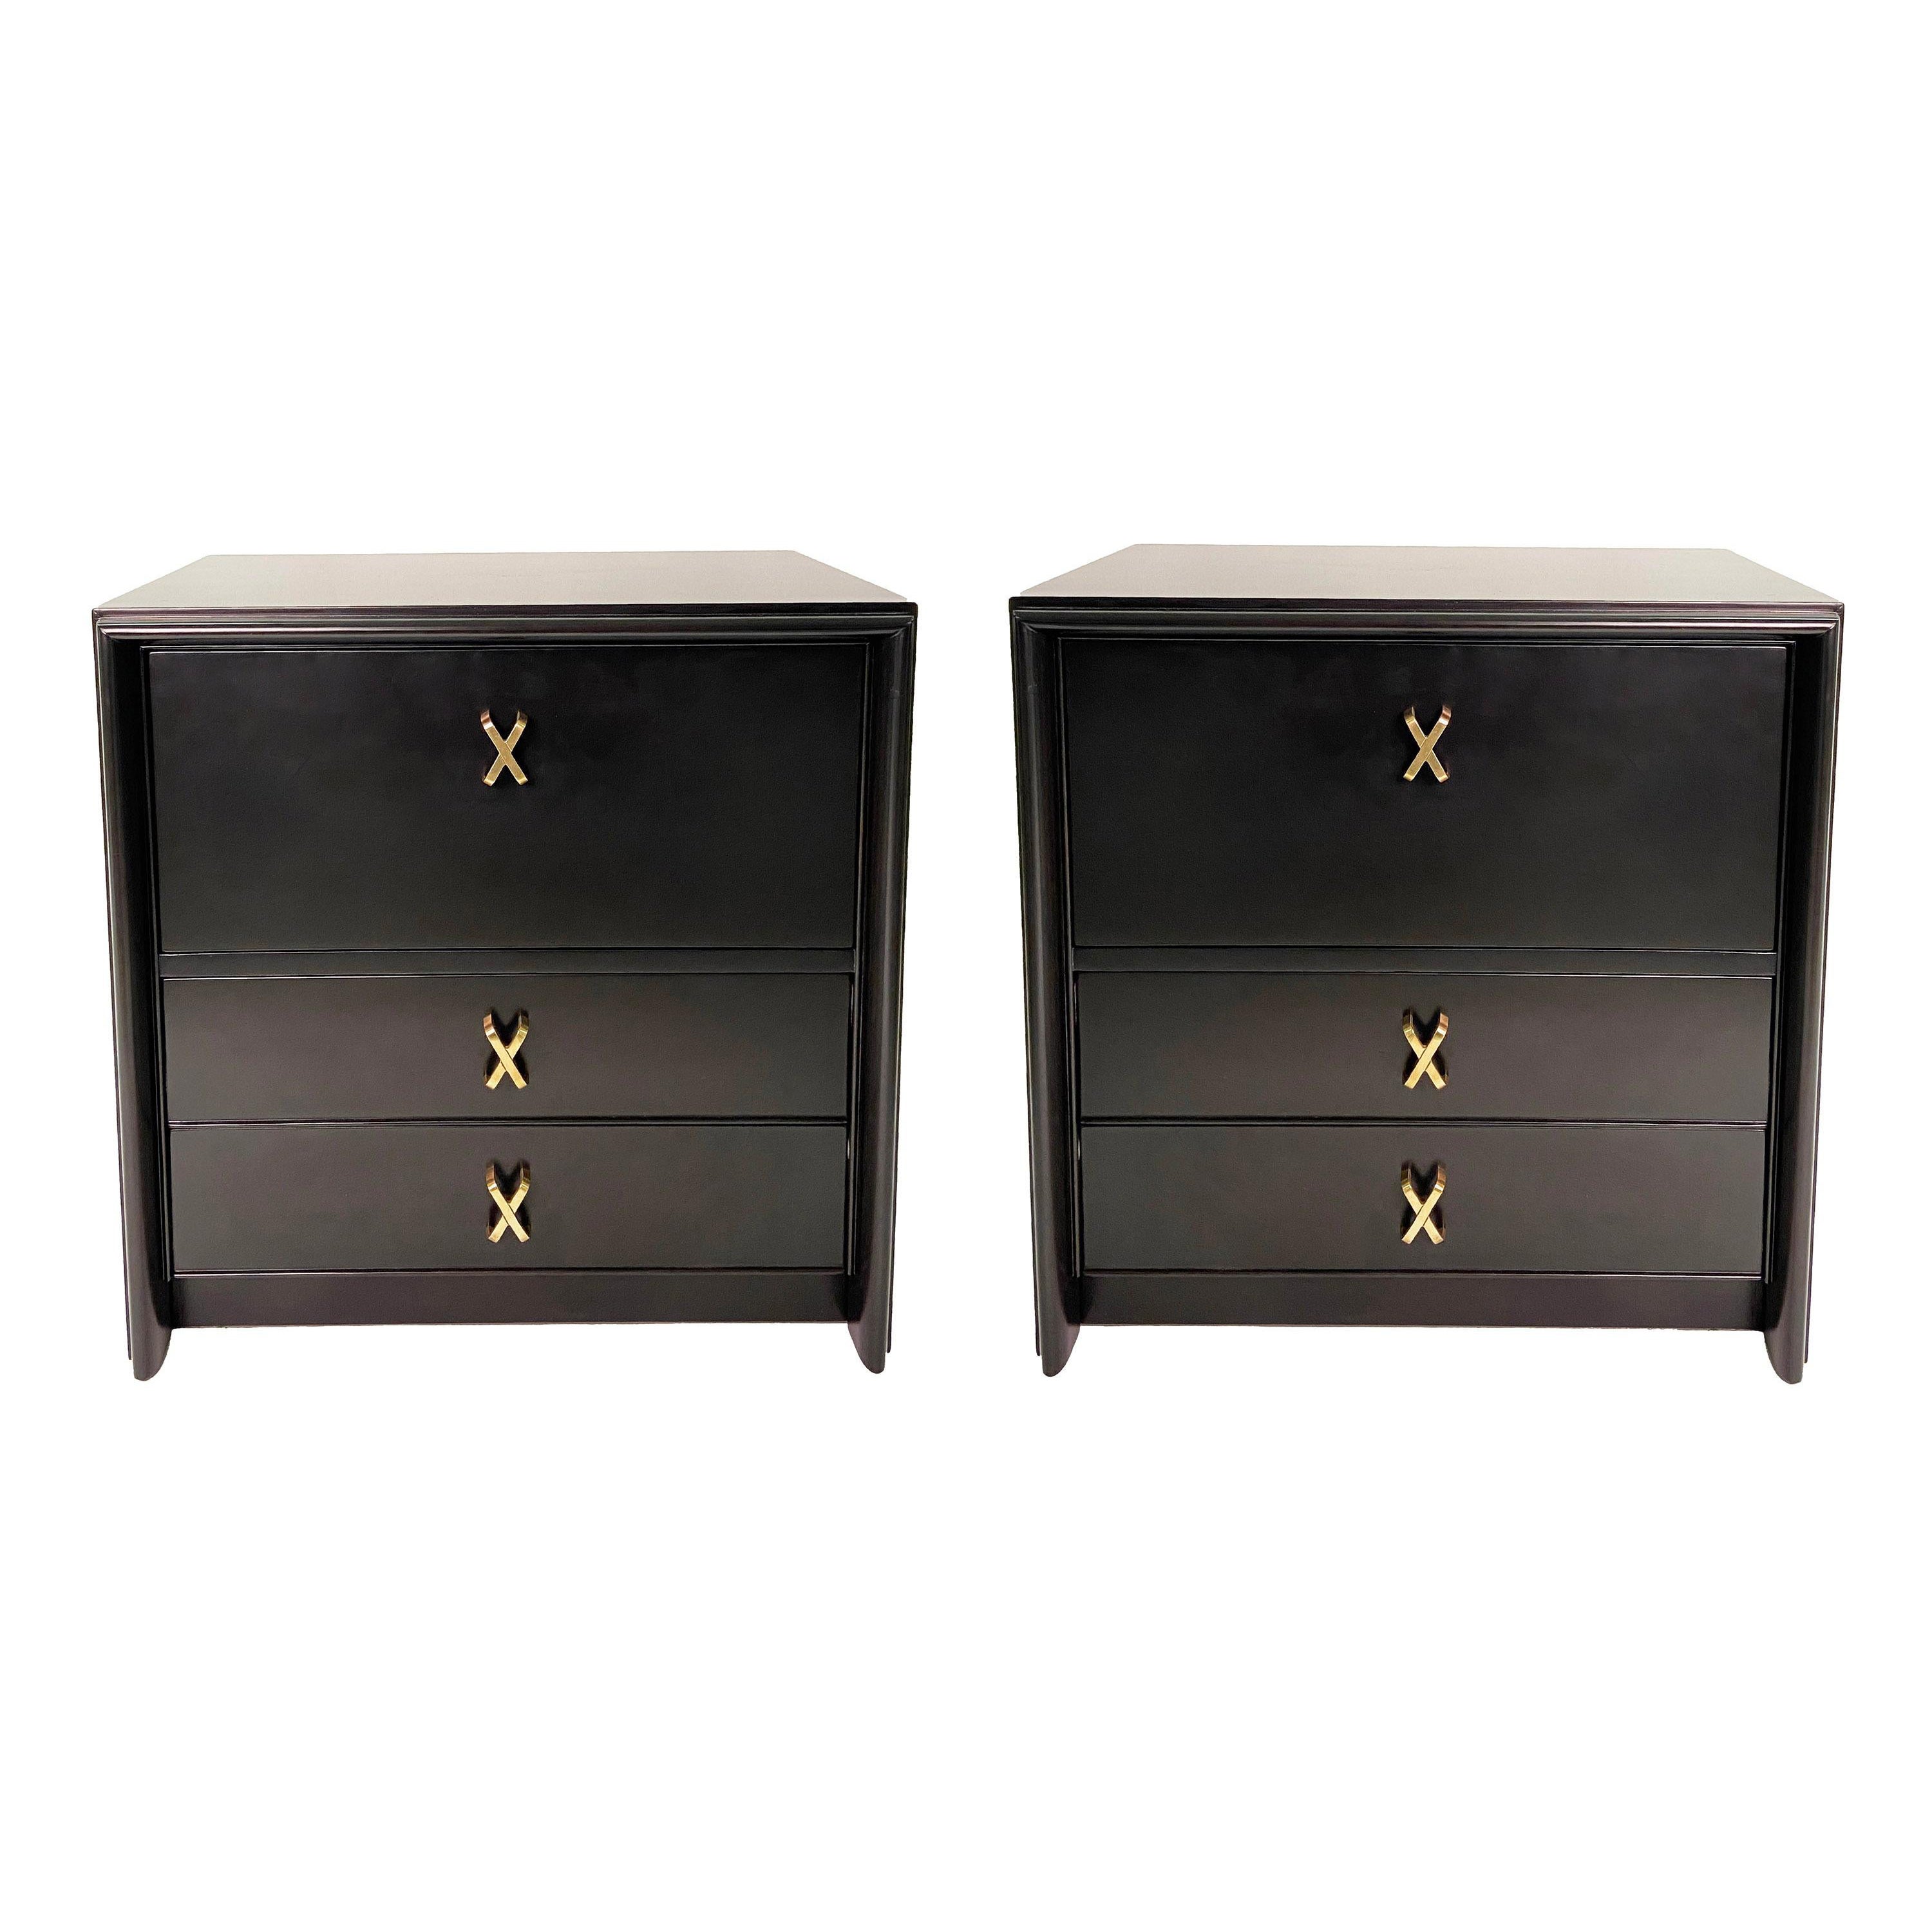 Mid-Century Modern Paul Frankl Nightstands Lacquered in Ebony, Pair For Sale